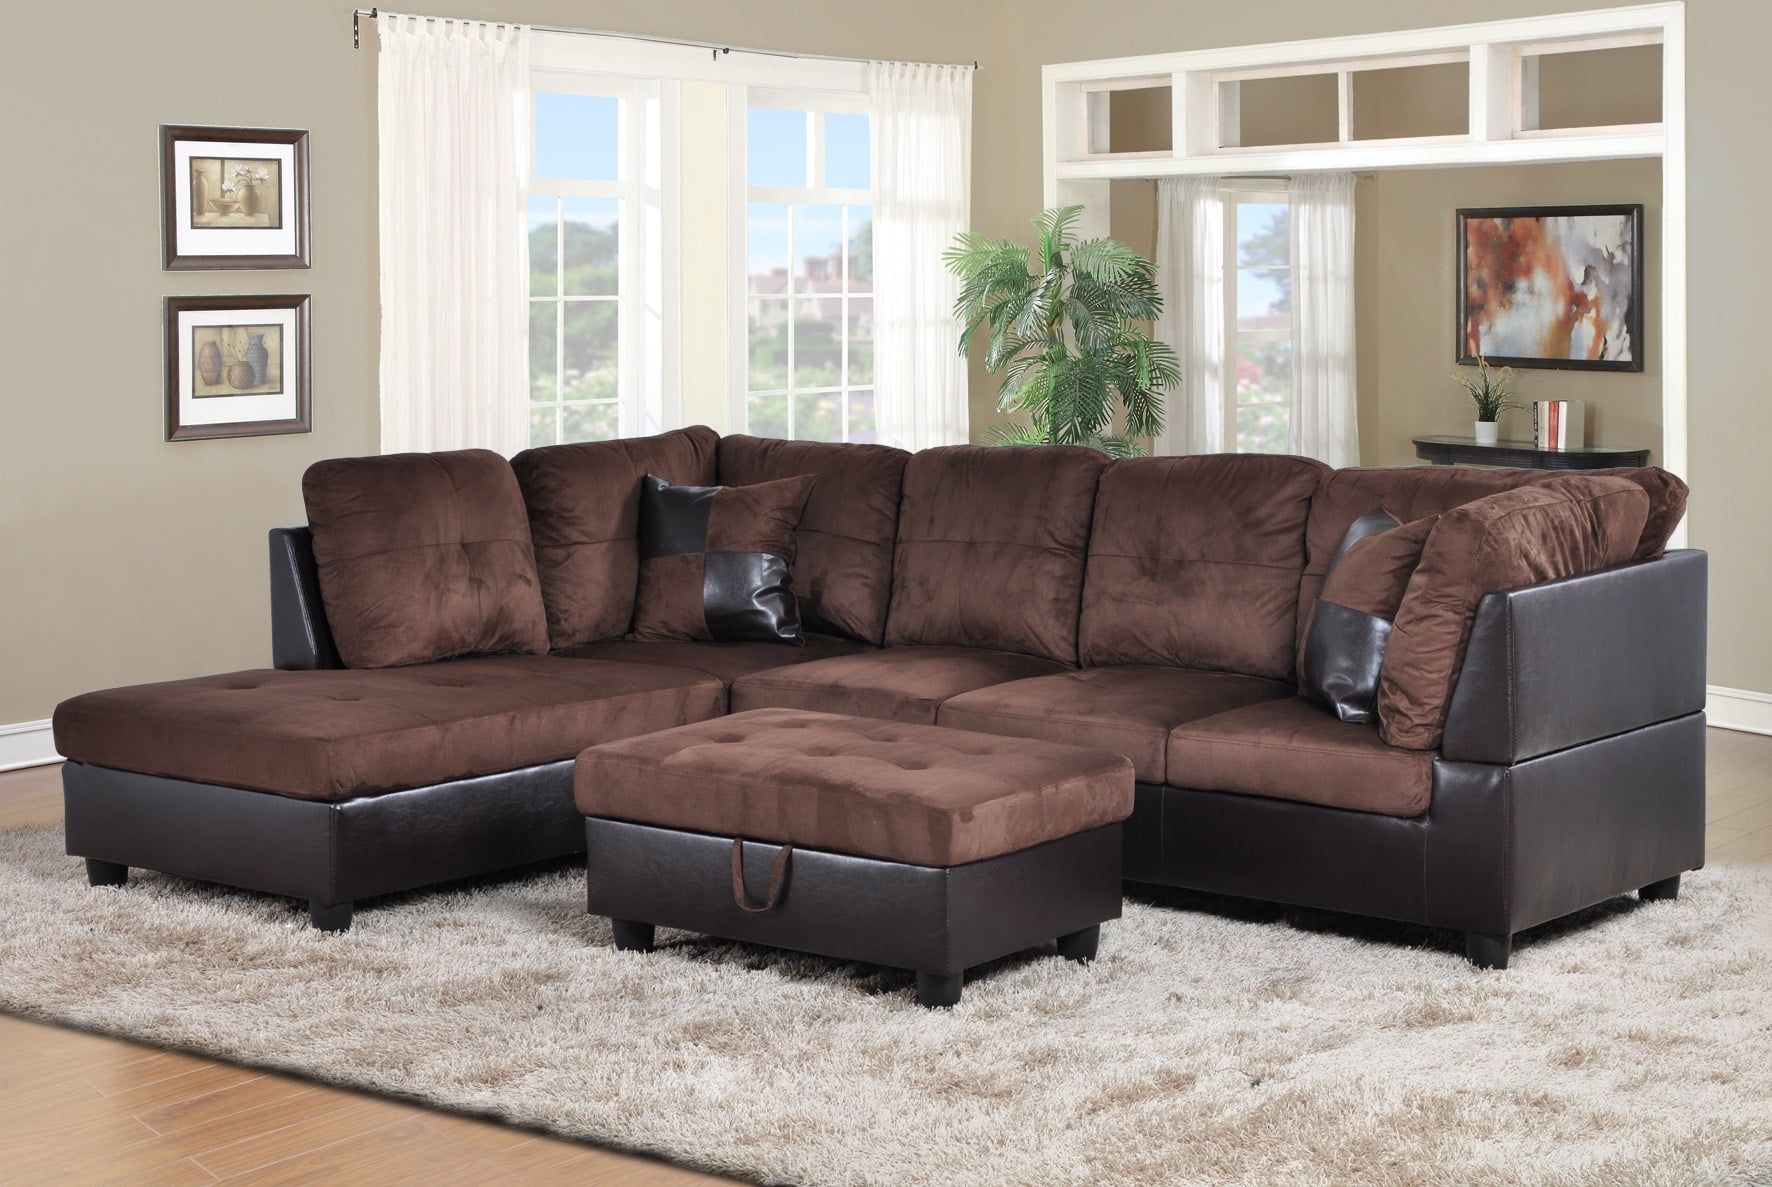 Ponliving Furniture Hermann Left Chaise Sectional Sofa With Storage Throughout Sofas In Chocolate Brown (Gallery 12 of 20)